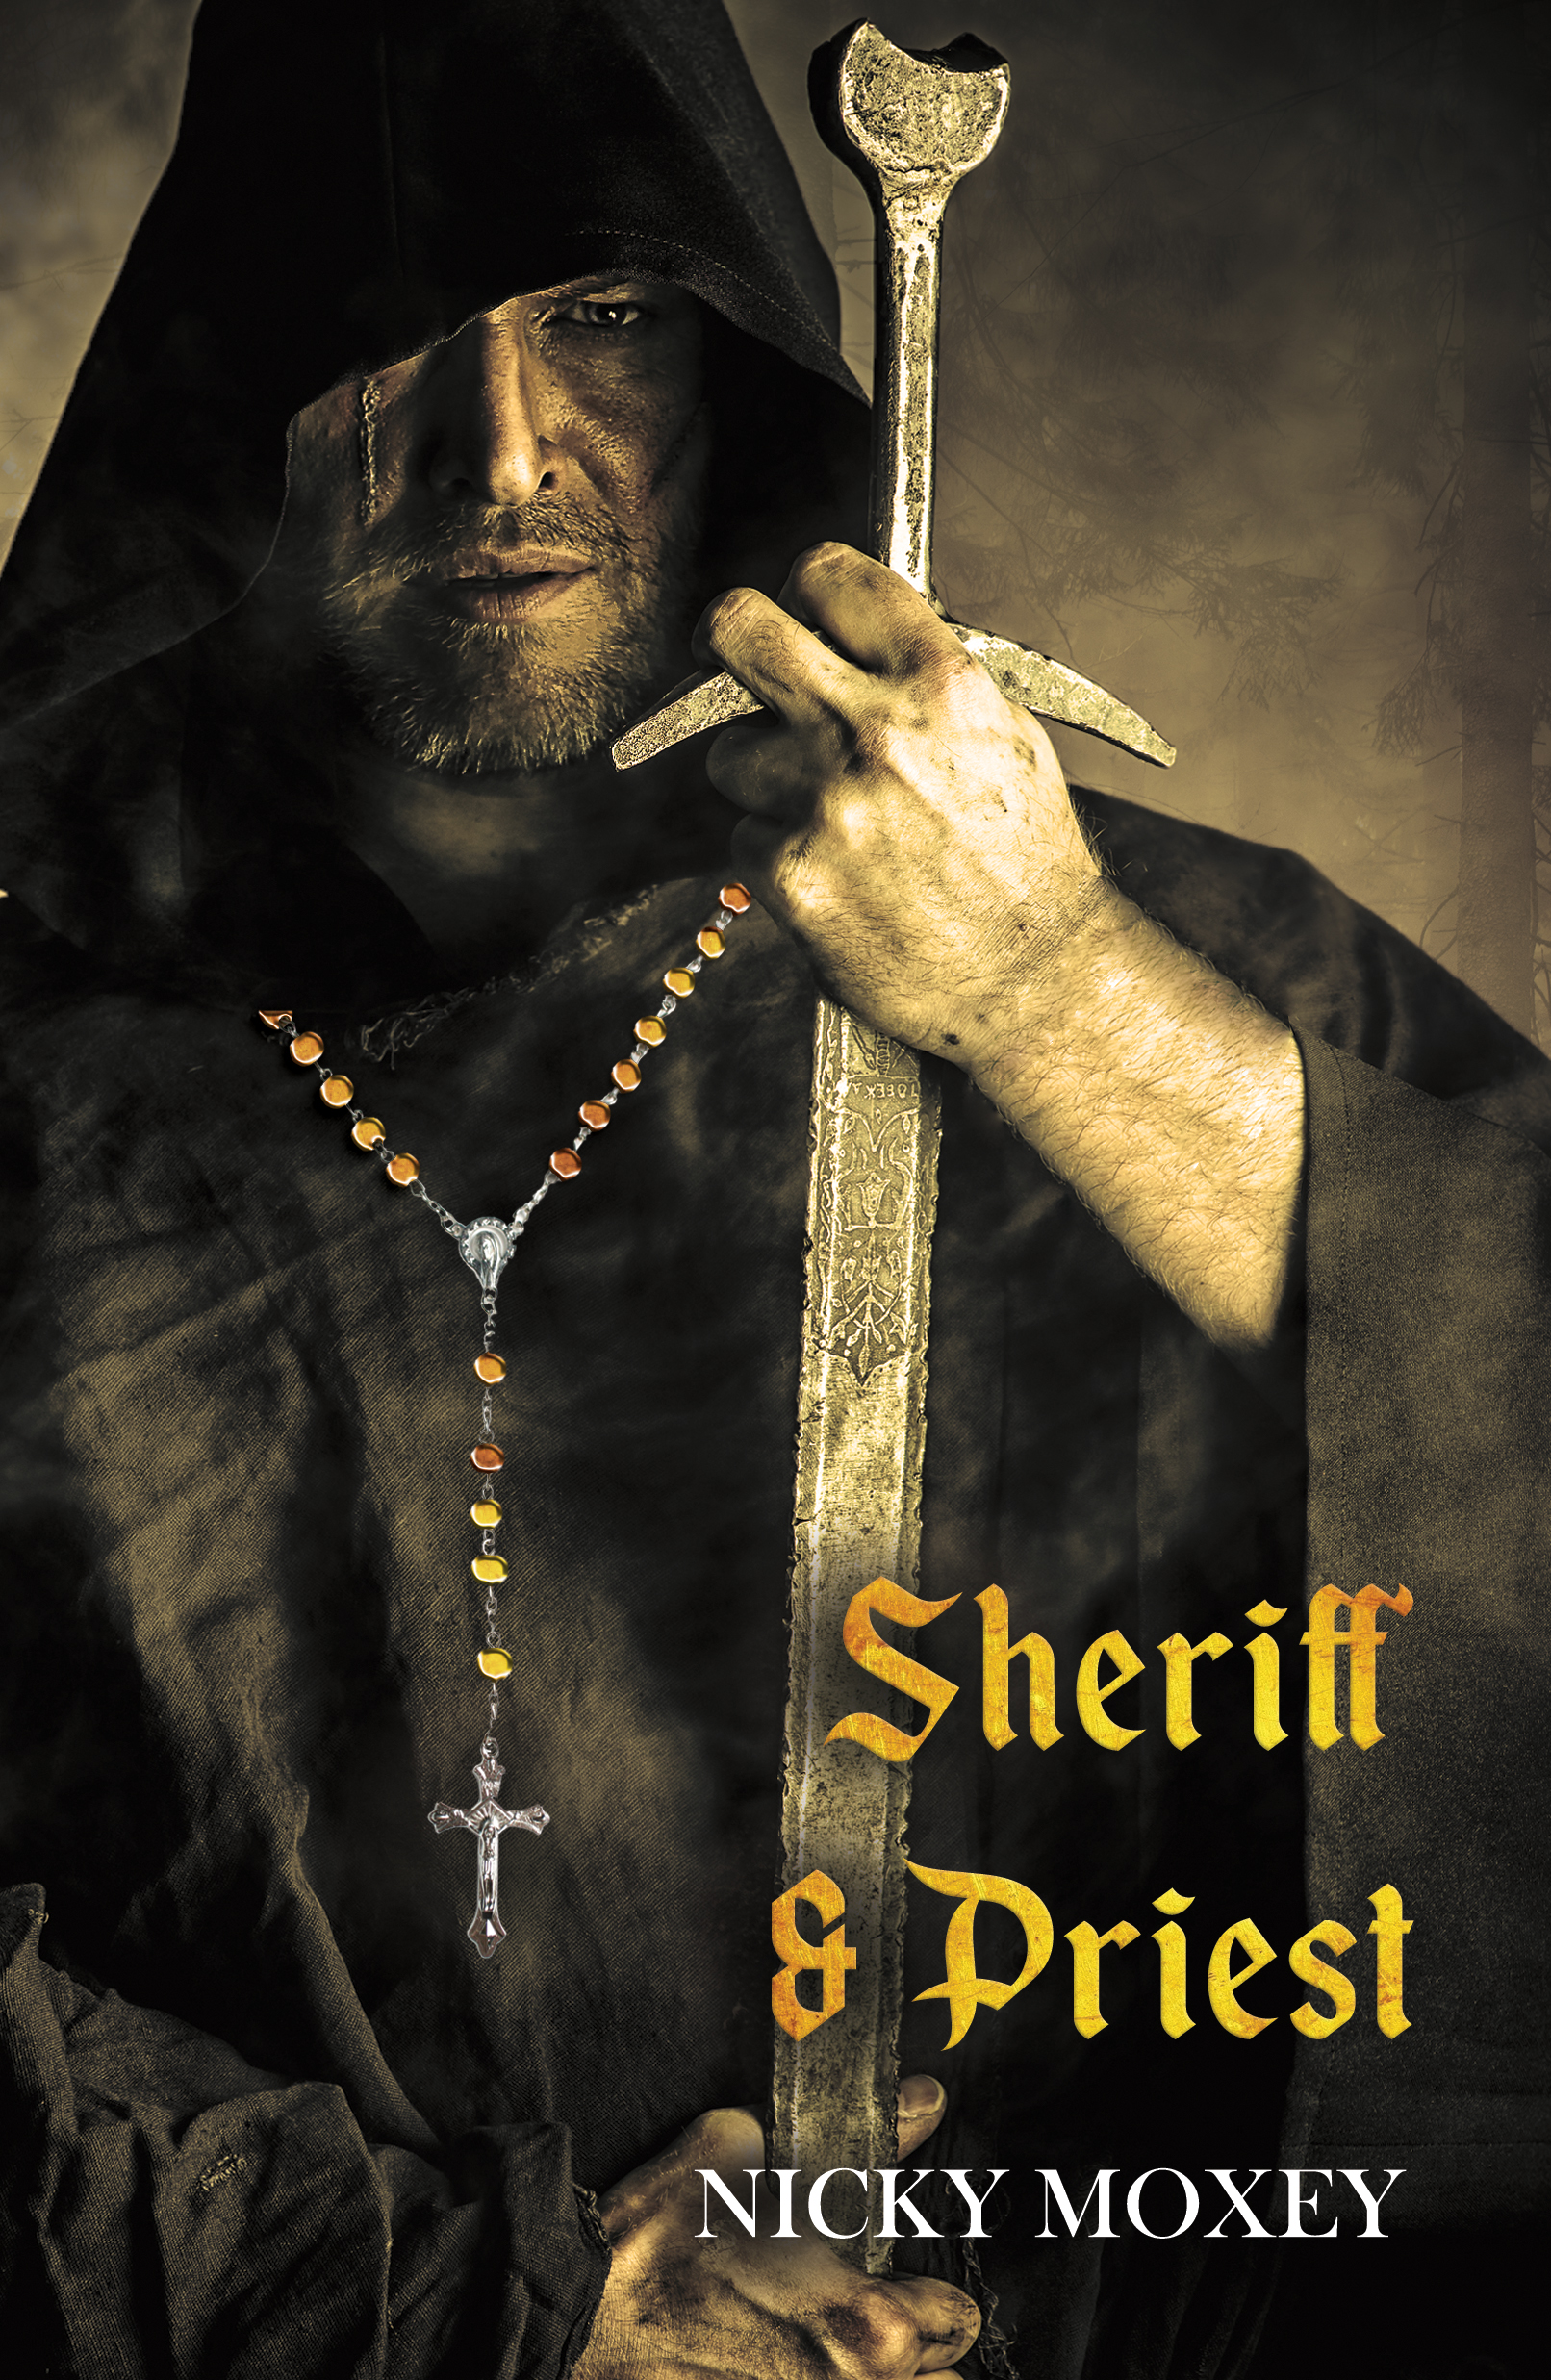 Sheriff and Priest by Nicky Moxey book cover